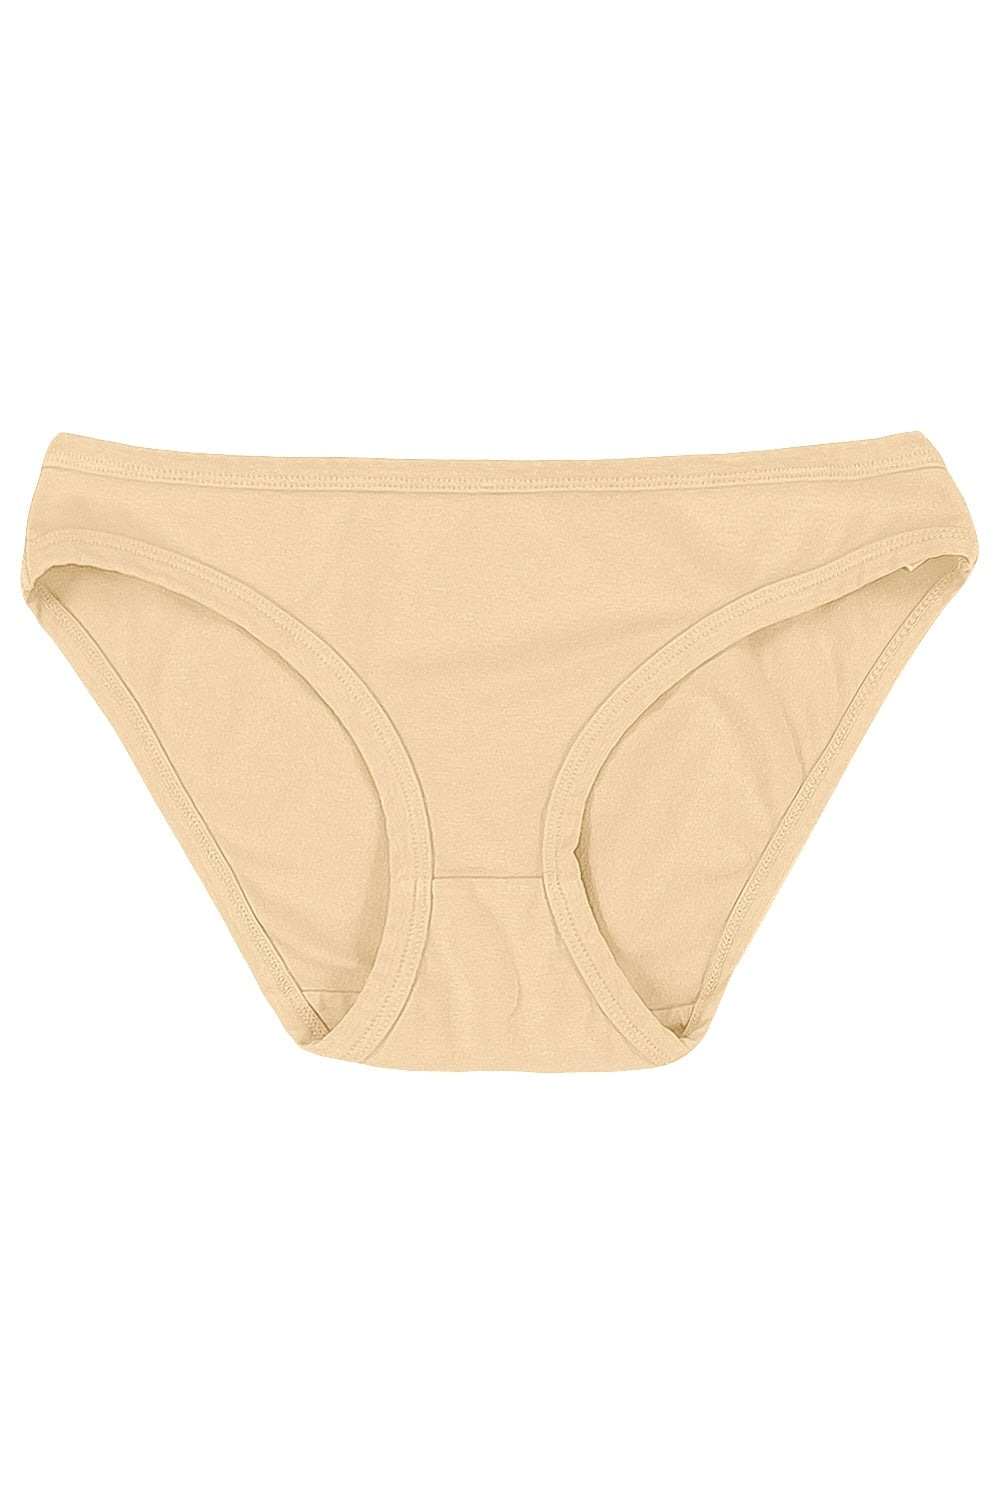 Organic Cotton + Hemp Mid-Rise Brief in Lagoon with Lilac